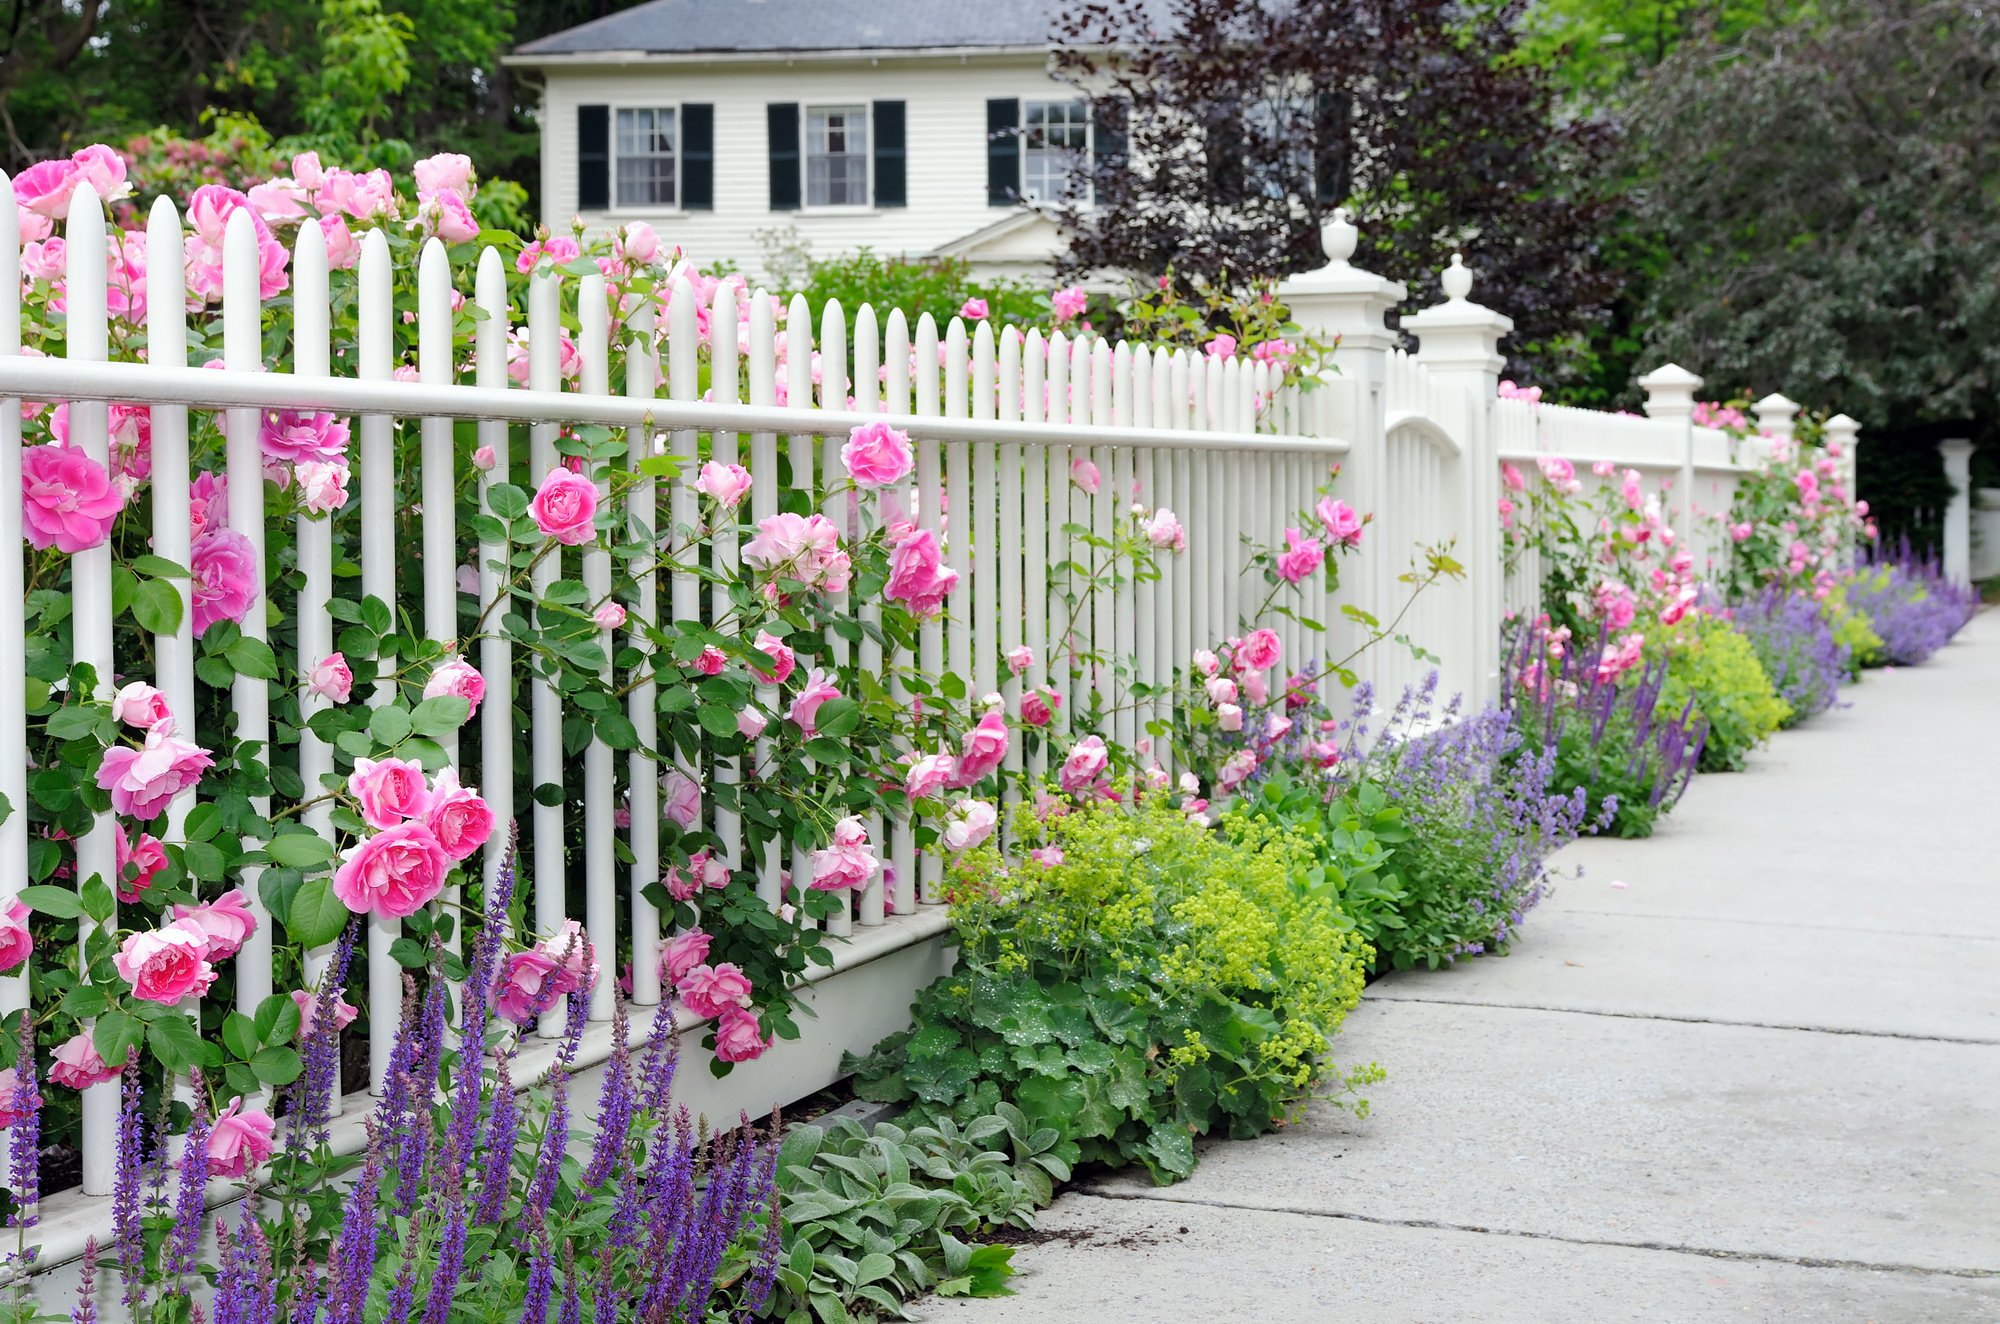 There are countless front yard fencing designs to accent your landscaping. From the classic picket white fence to modern alternatives, discover more here!